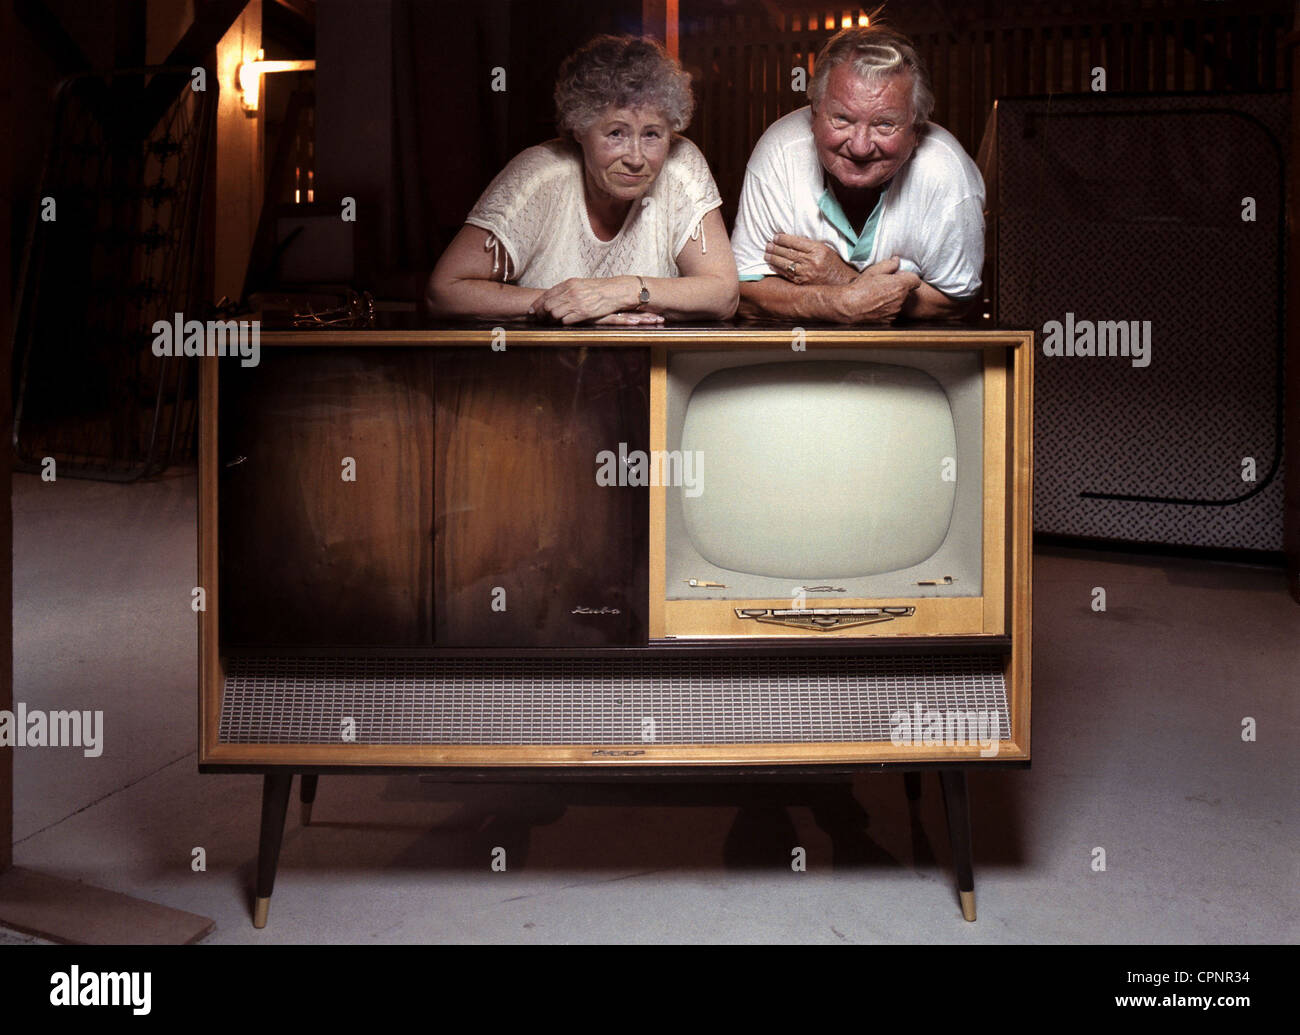 broadcast,television,married couple with their dusted television cabinet Kuba Czardas from 1960 on the garret,Munich,Germany,couples,pensioner,pensioners,retired people,pensioner married couple,housetop find,TV device,television receiver,TV history,antiquarian appliance,technology,engineering,technologies,senior,seniors,antiquarian,60s,symbol image,symbolic,symbolical,outdated,out of date,out-of-date,television set,TV,television sets,TV sets,TVs,TV set,tube television,tube systems,tubes-receiver,home electronics,consumer el,Additional-Rights-Clearences-Not Available Stock Photo